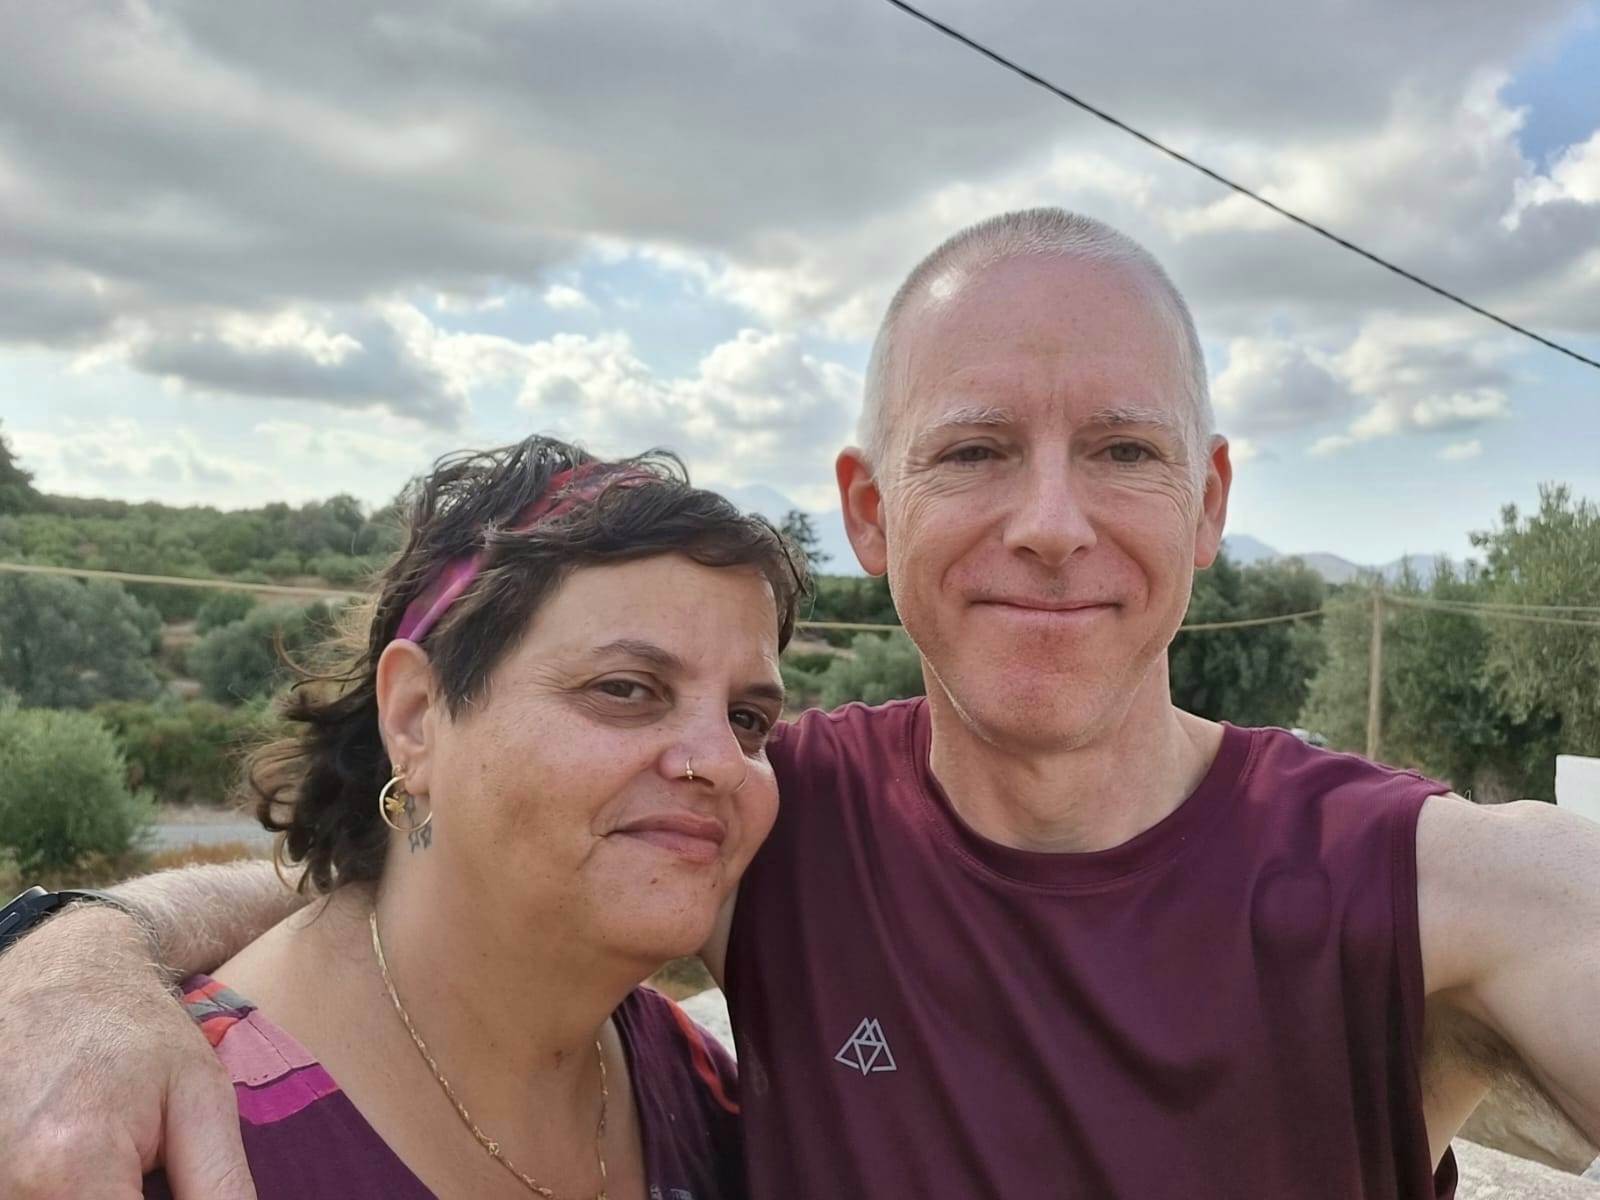 Ben and his wife Meyrav smiling for a photo 